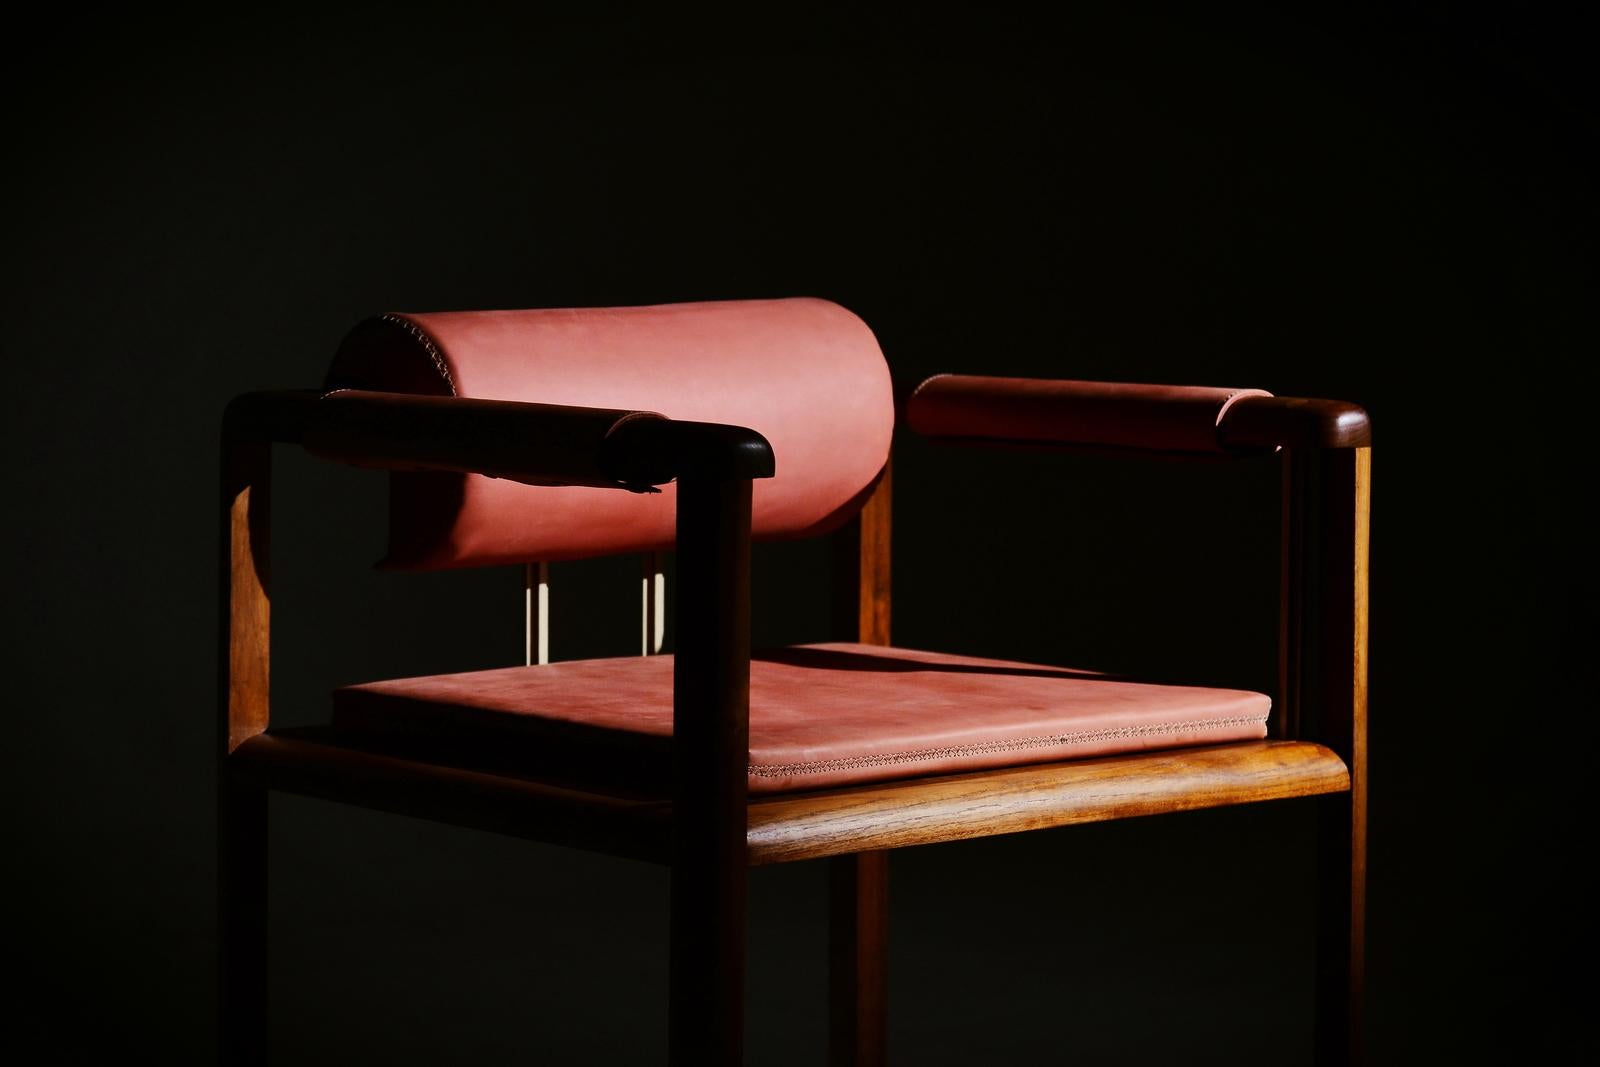 Bespoke Chair Reclaimed Hardwood Hand Stitched Leather Seating, P. Tendercool For Sale 9